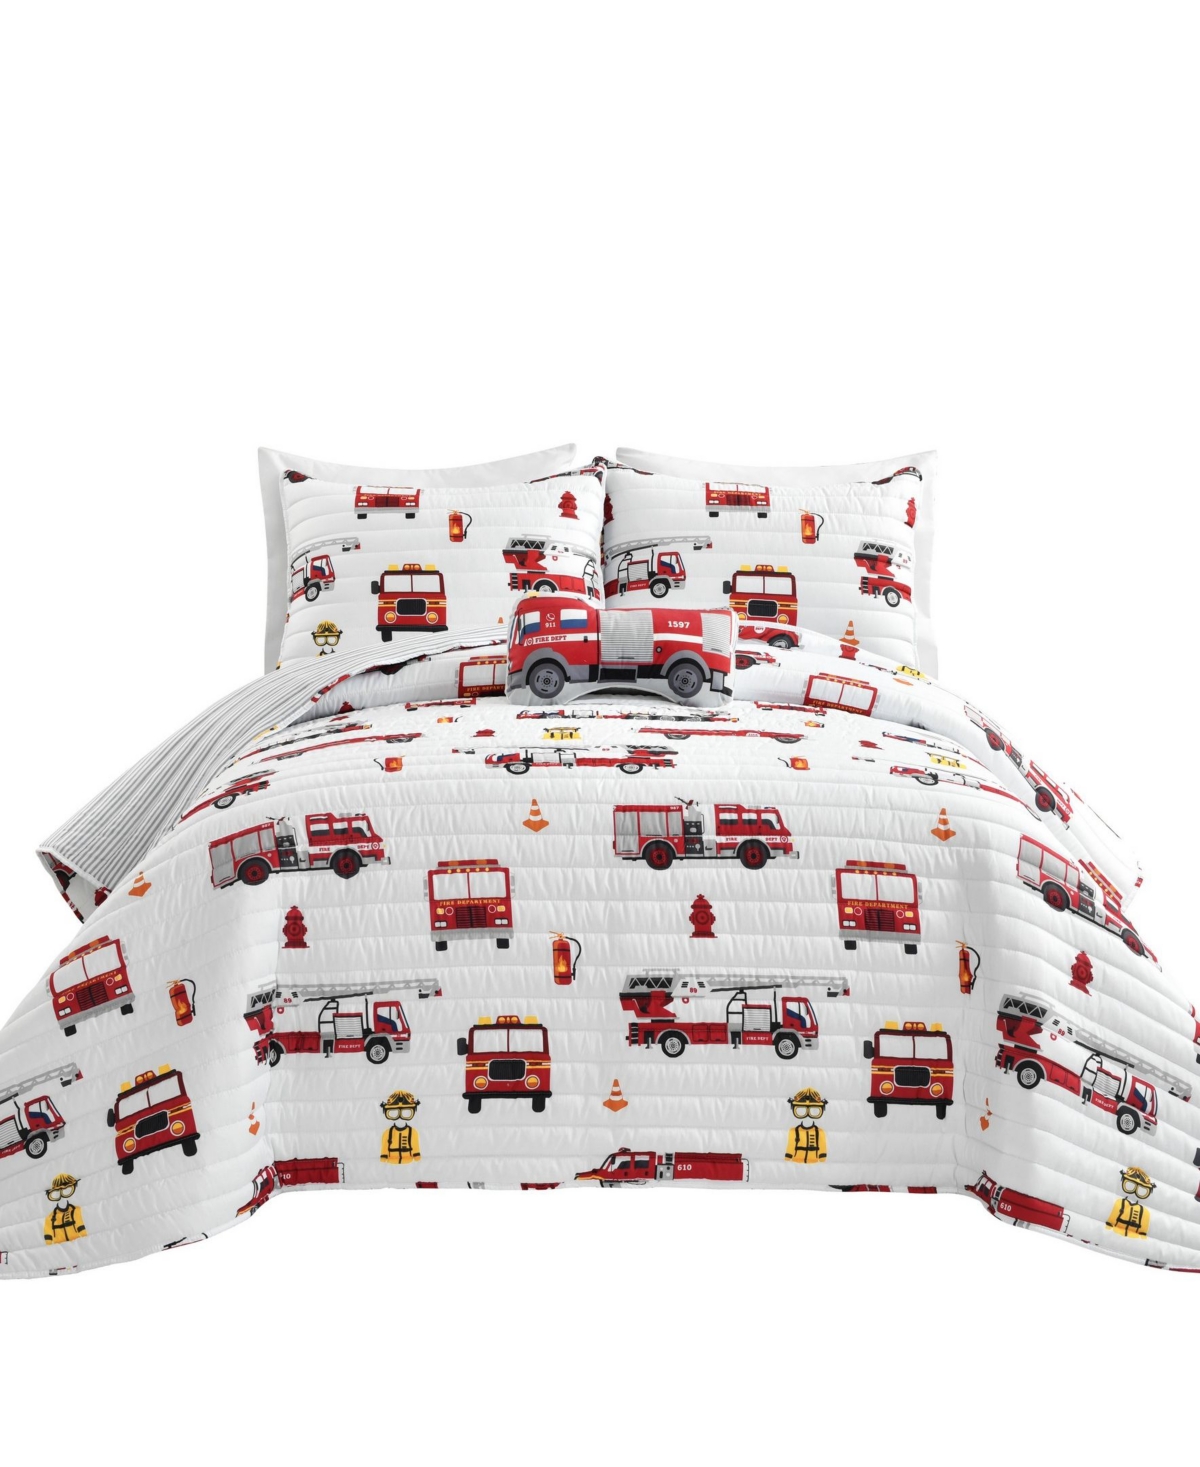 Lush Decor Fire Truck 4 Piece Quilt Set For Kids, Full/queen In Red,white